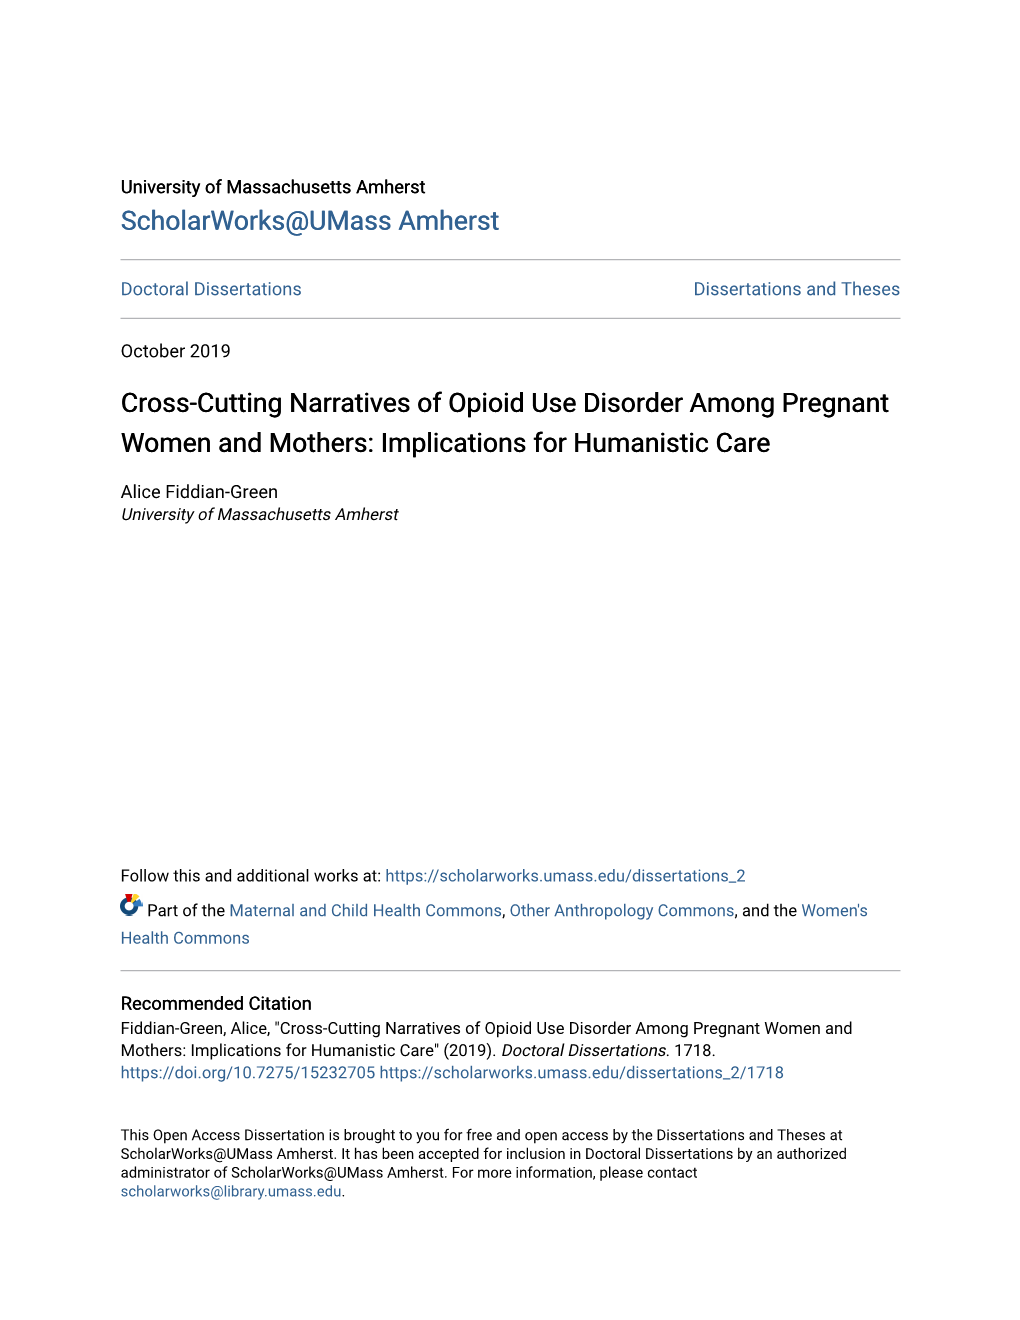 Cross-Cutting Narratives of Opioid Use Disorder Among Pregnant Women and Mothers: Implications for Humanistic Care